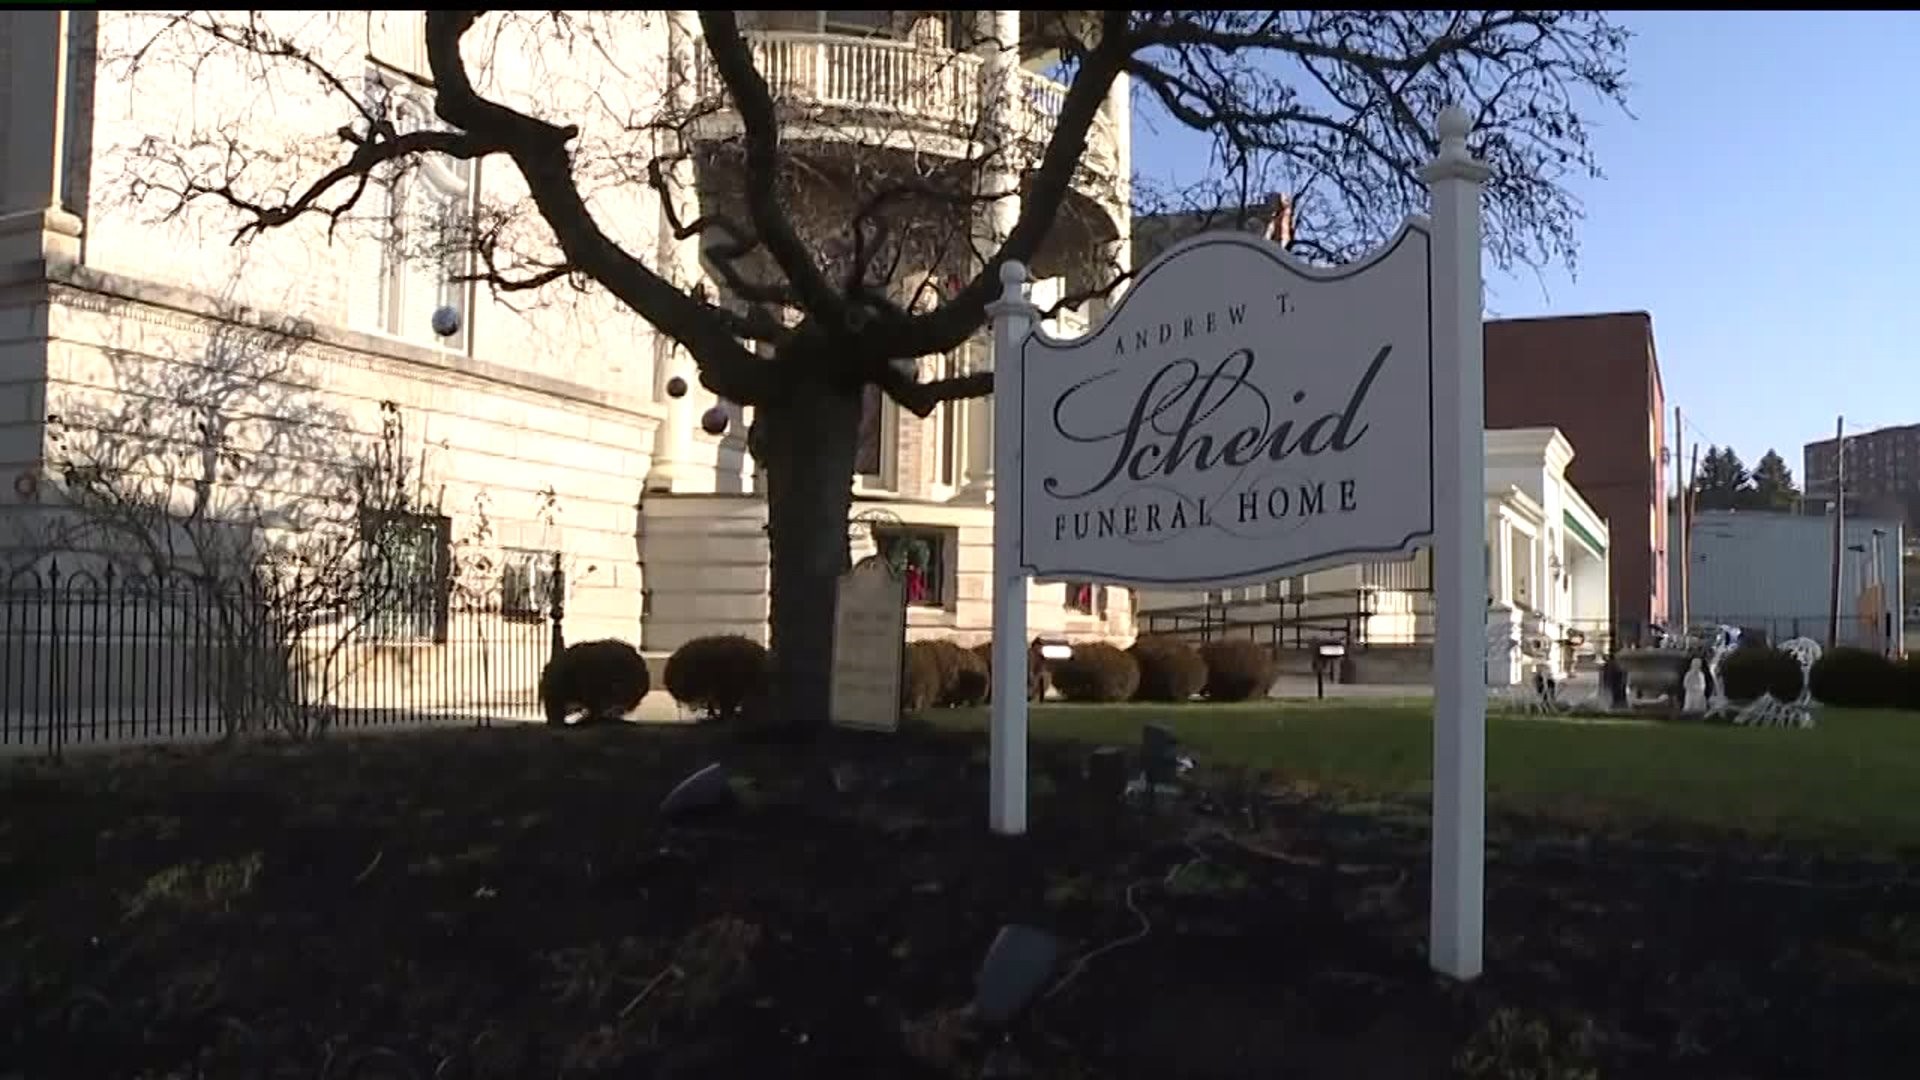 Customers of funeral home allege mistreatment and poor service